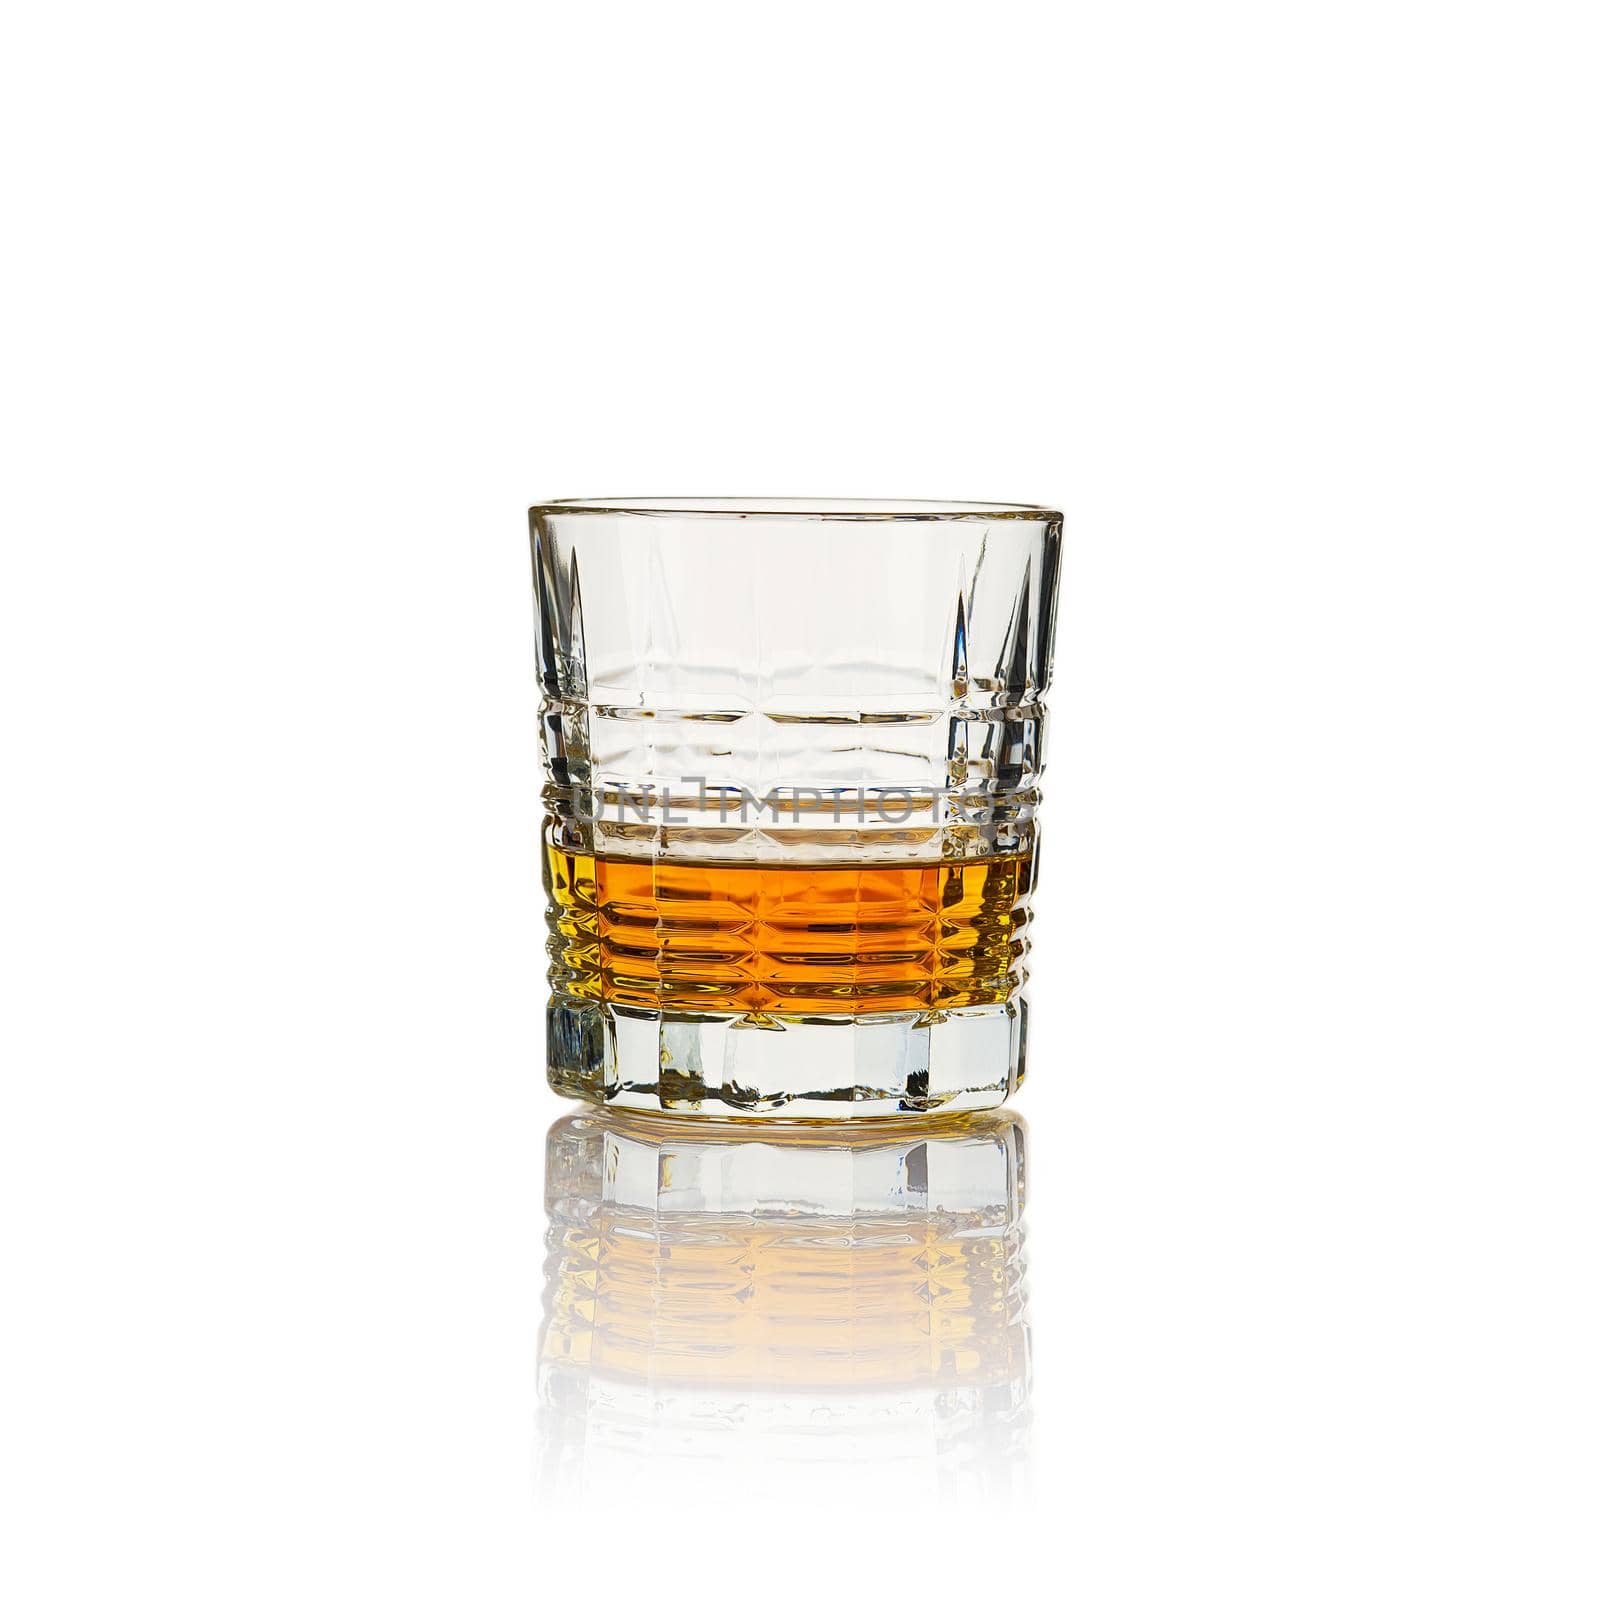 Glass of whisky - without ice and reflection, studio shot by PhotoTime